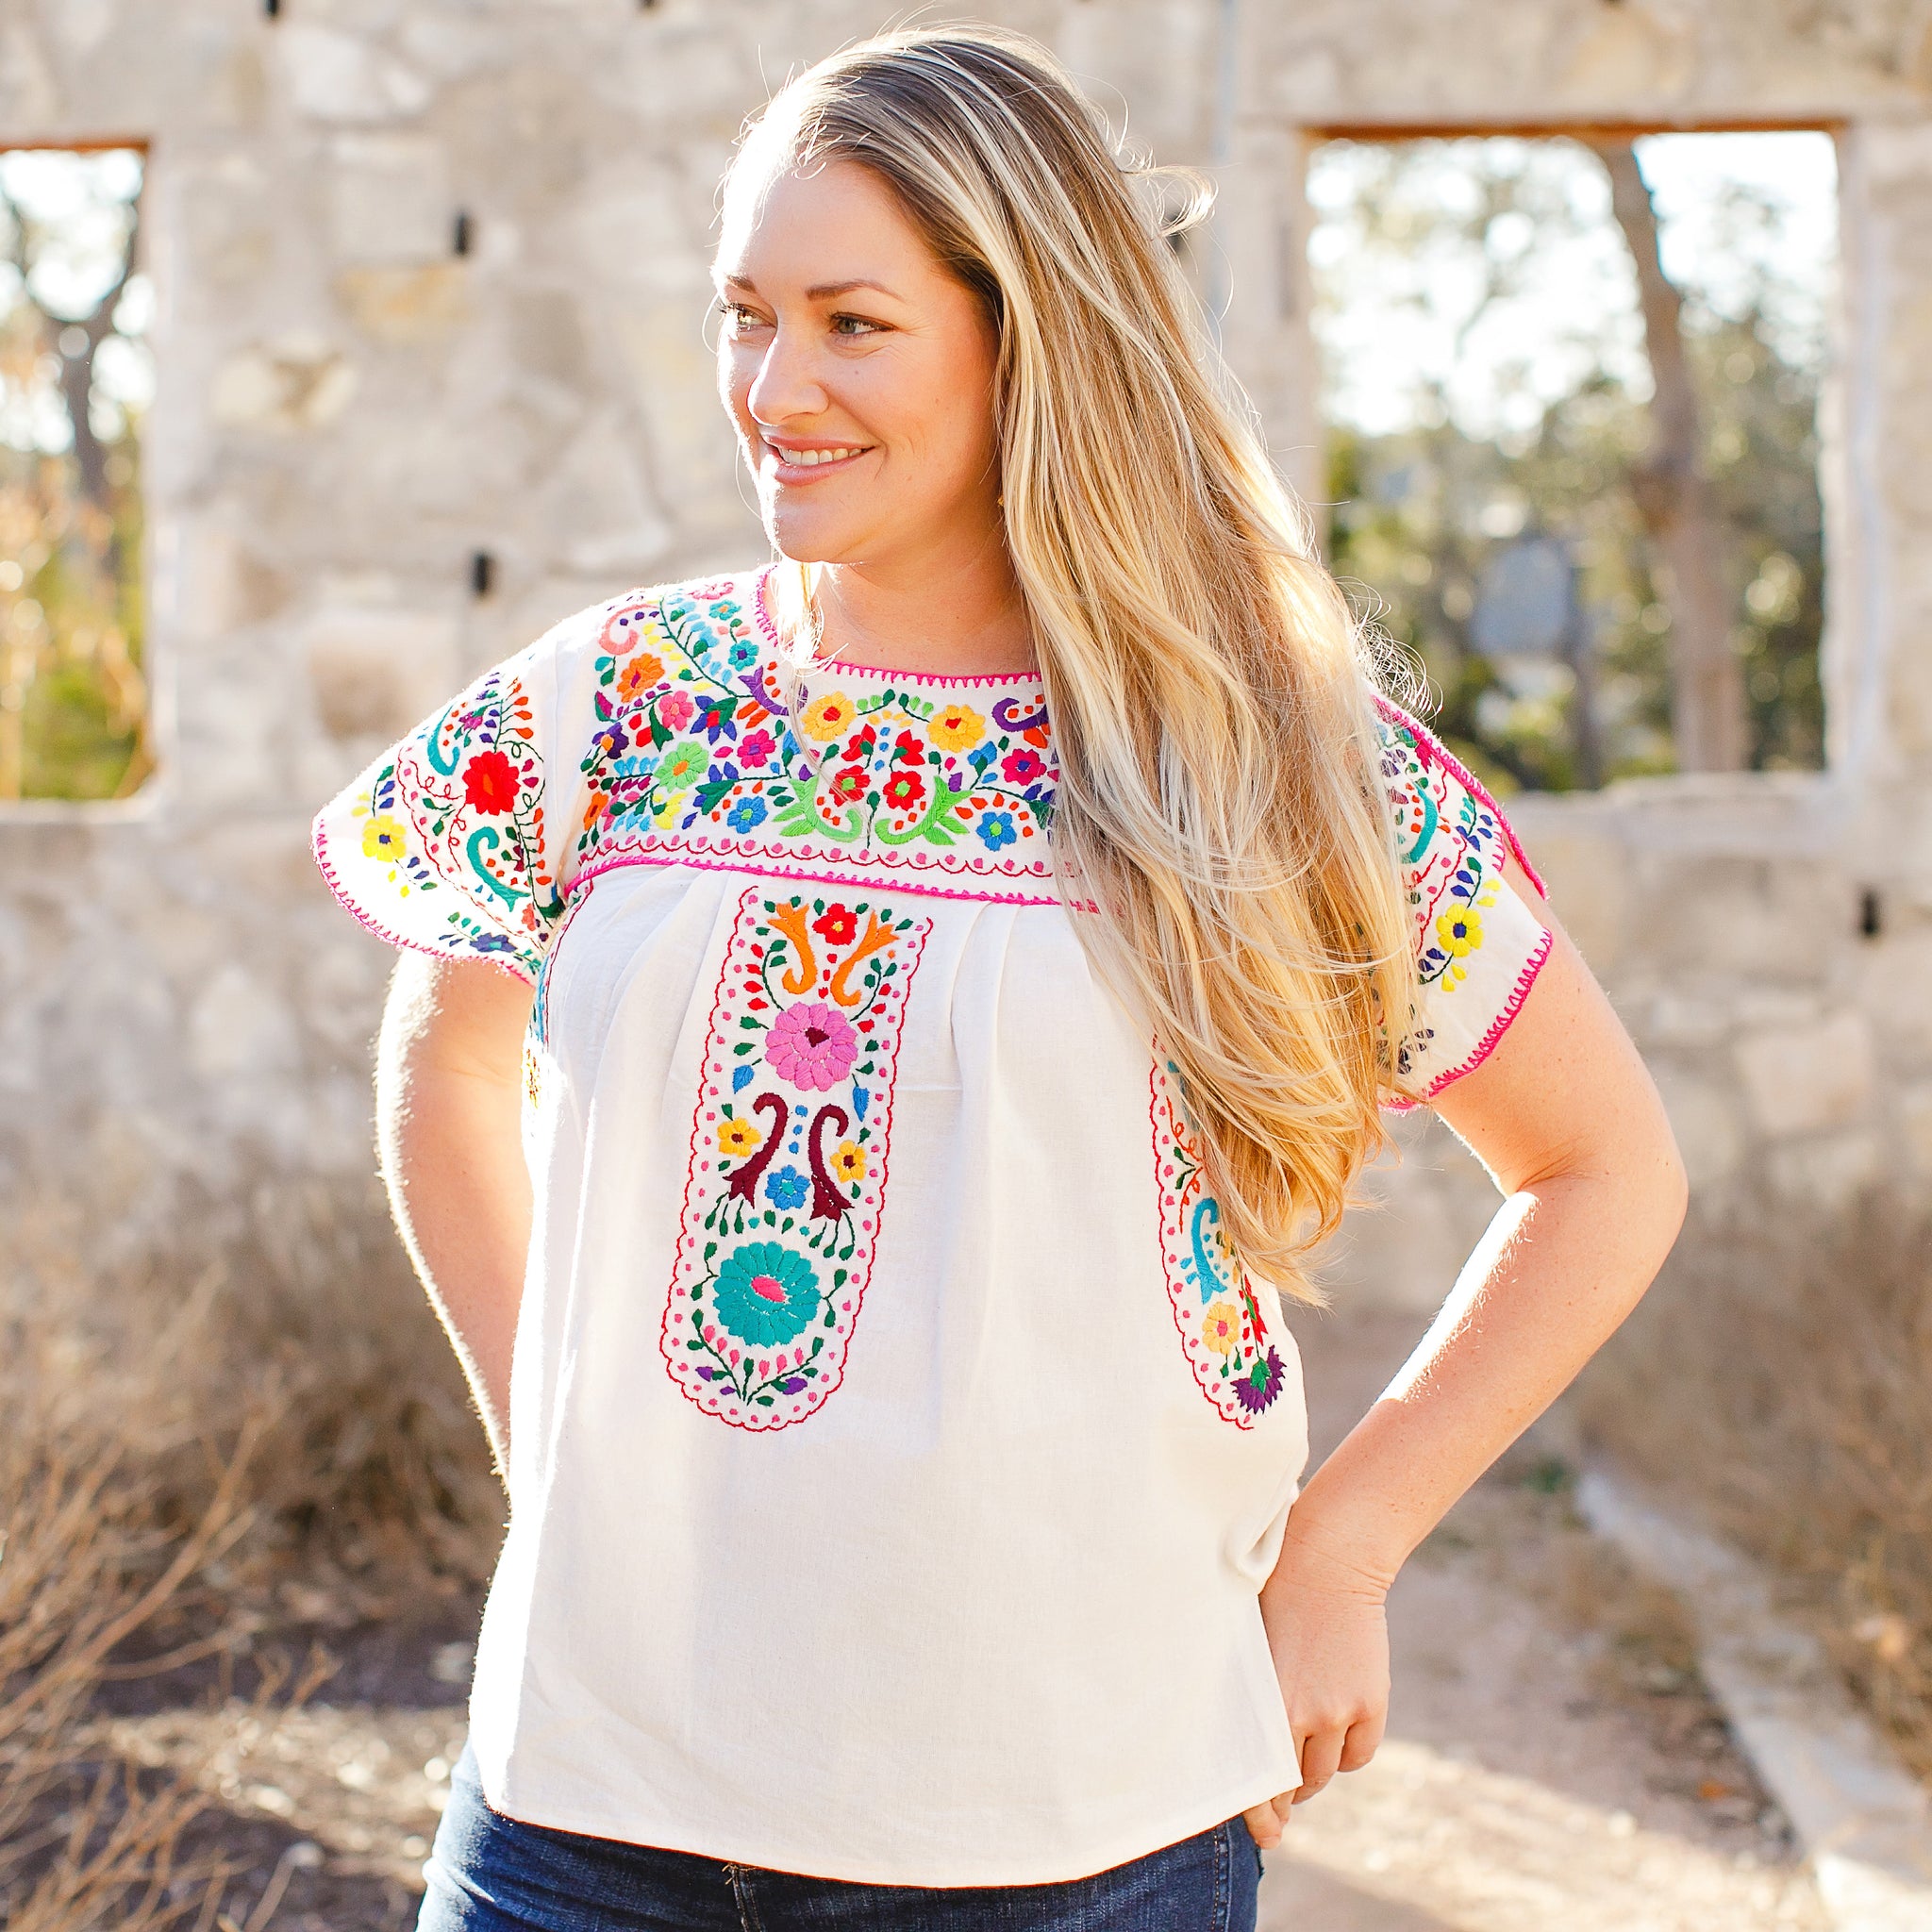 Tulipan Blouse - Hand Embroidered by Mexican Artisans